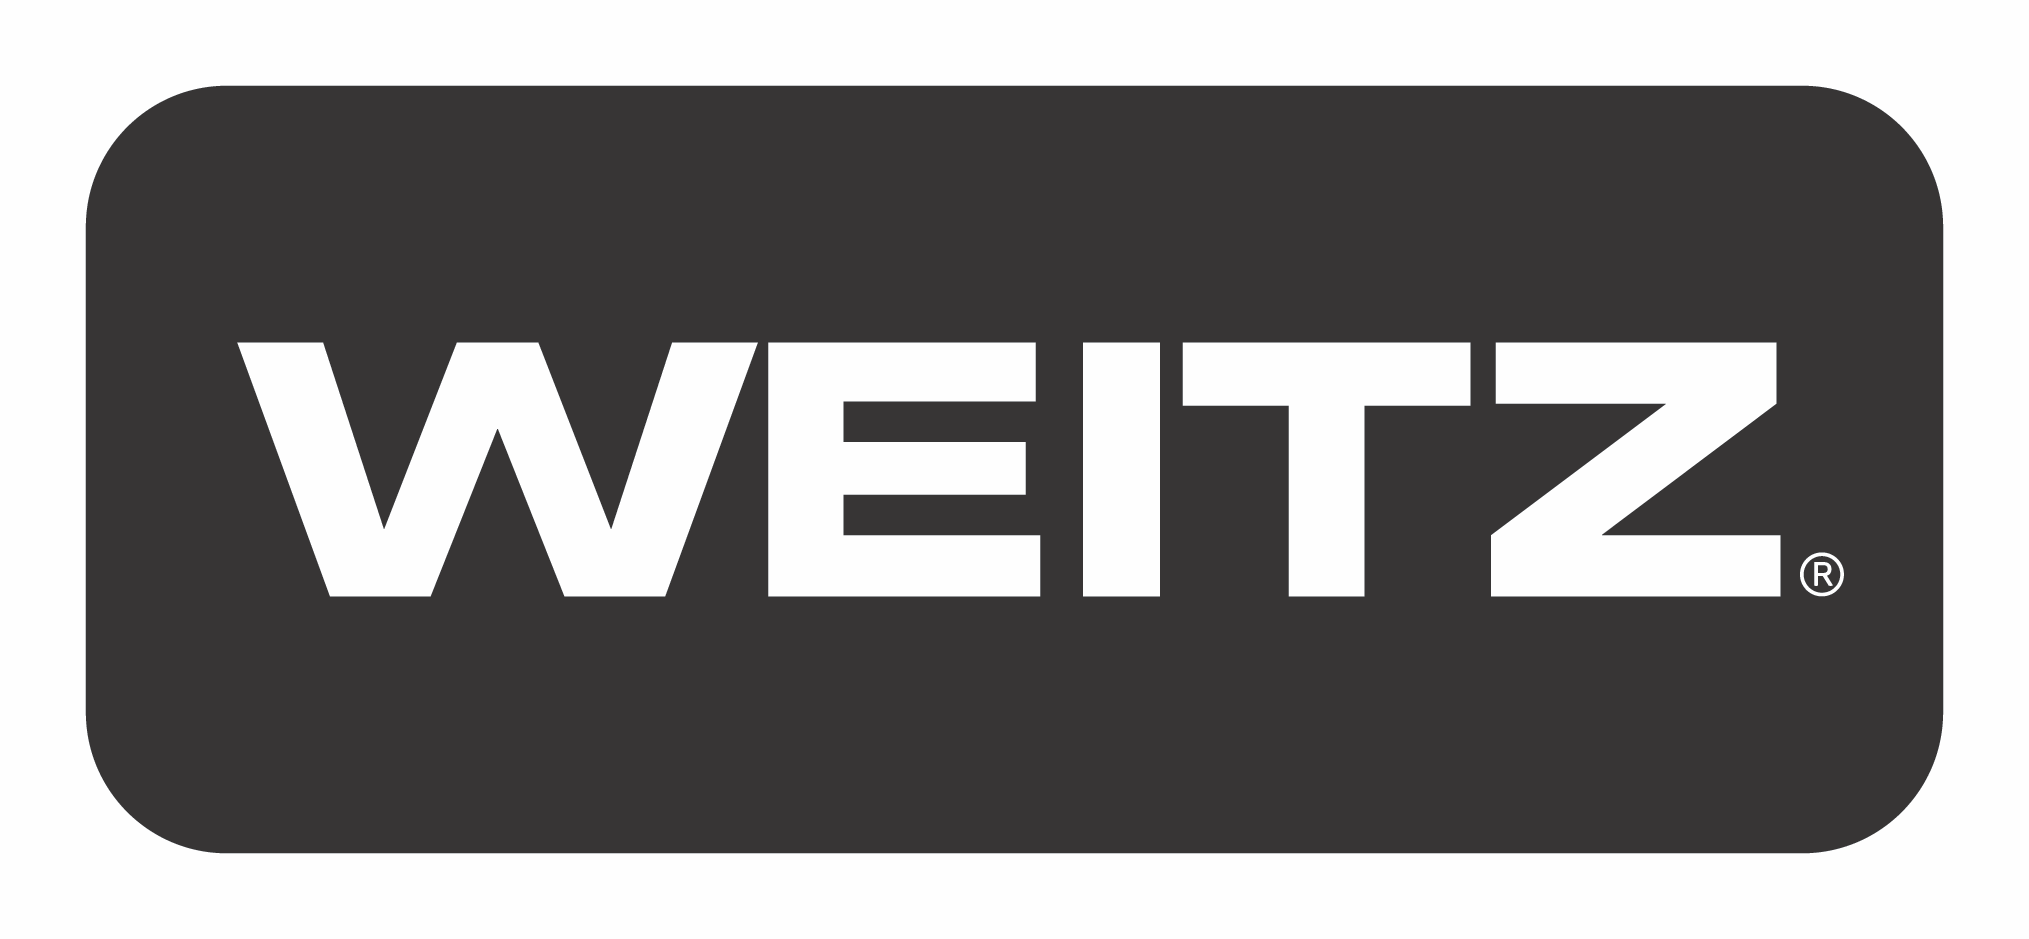 WEITZ company logo with bold white letters on a black rounded rectangle background